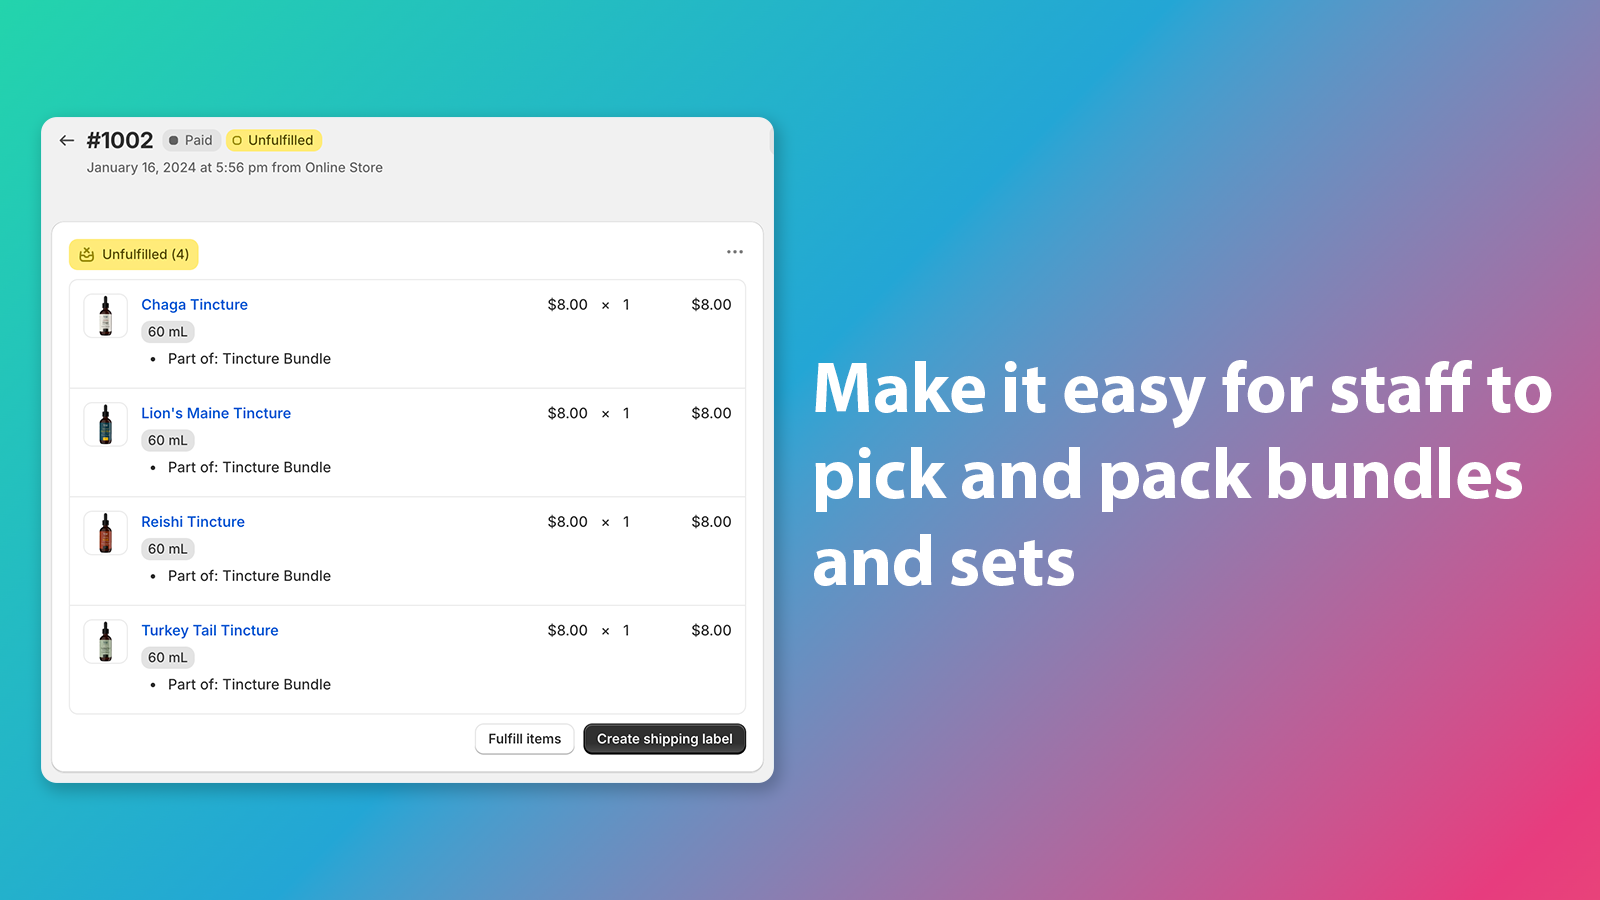 Make it easy for staff to pick and pack bundles and sets